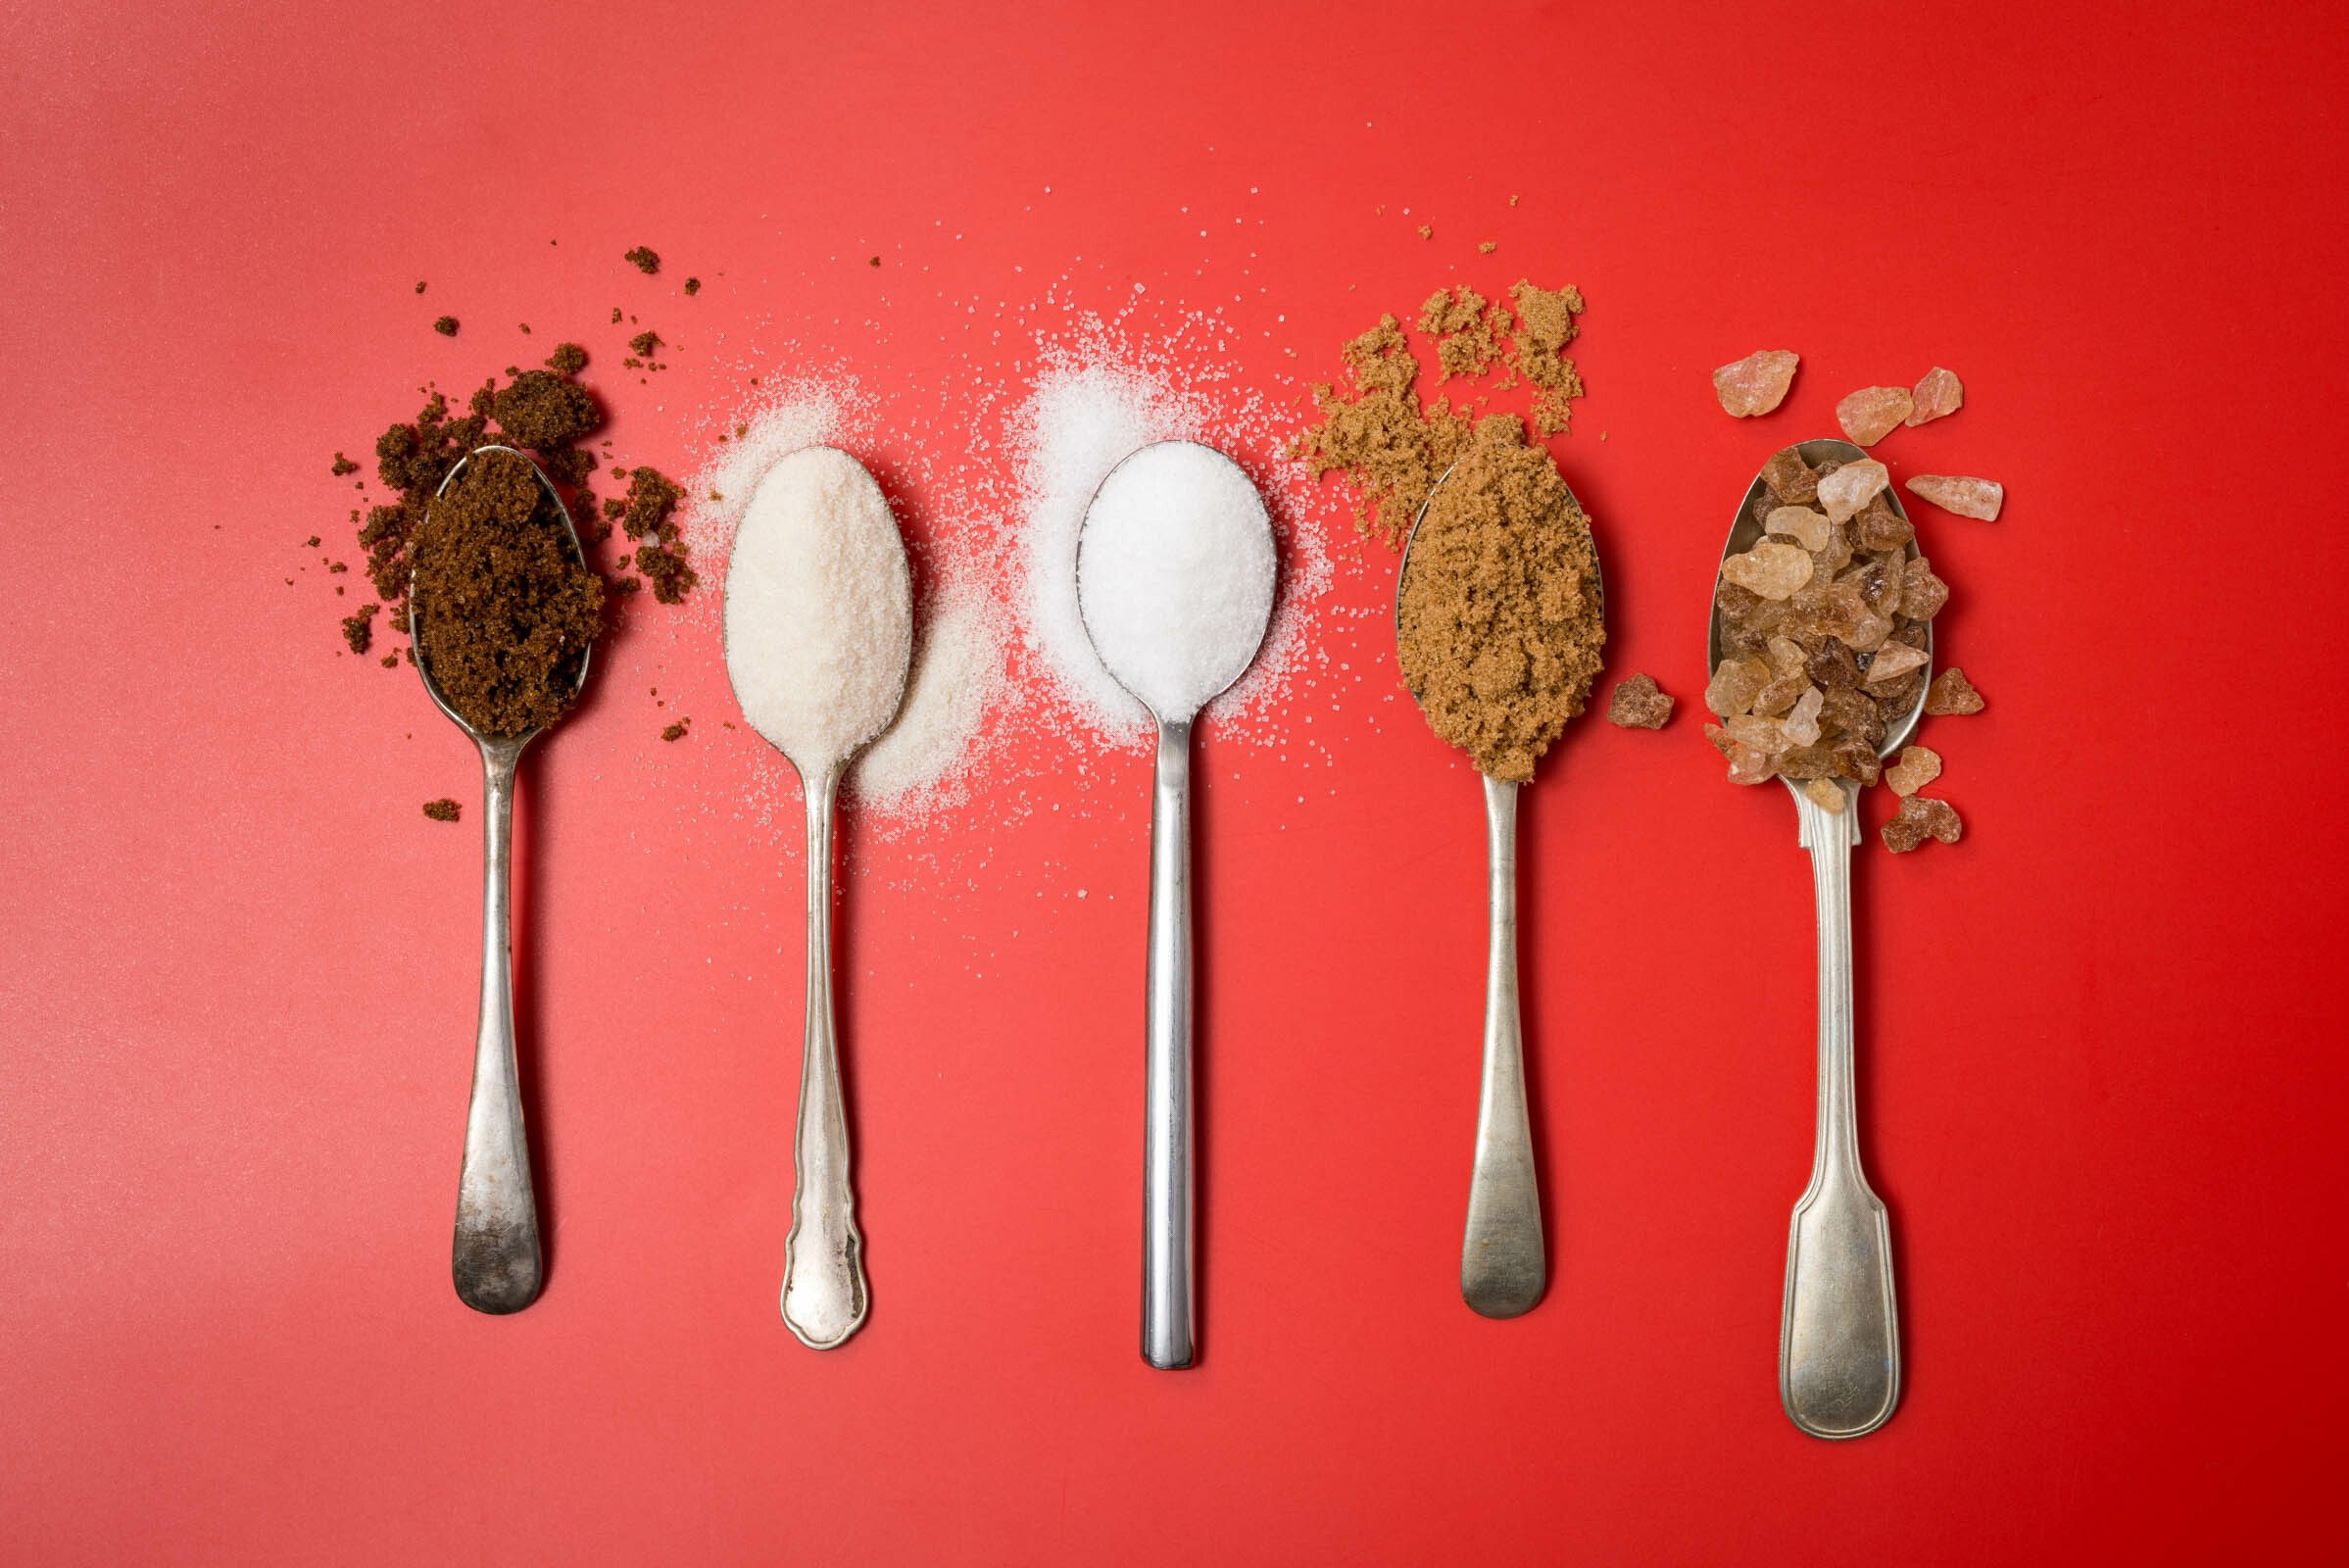 Five teaspoons of sugar a day for children